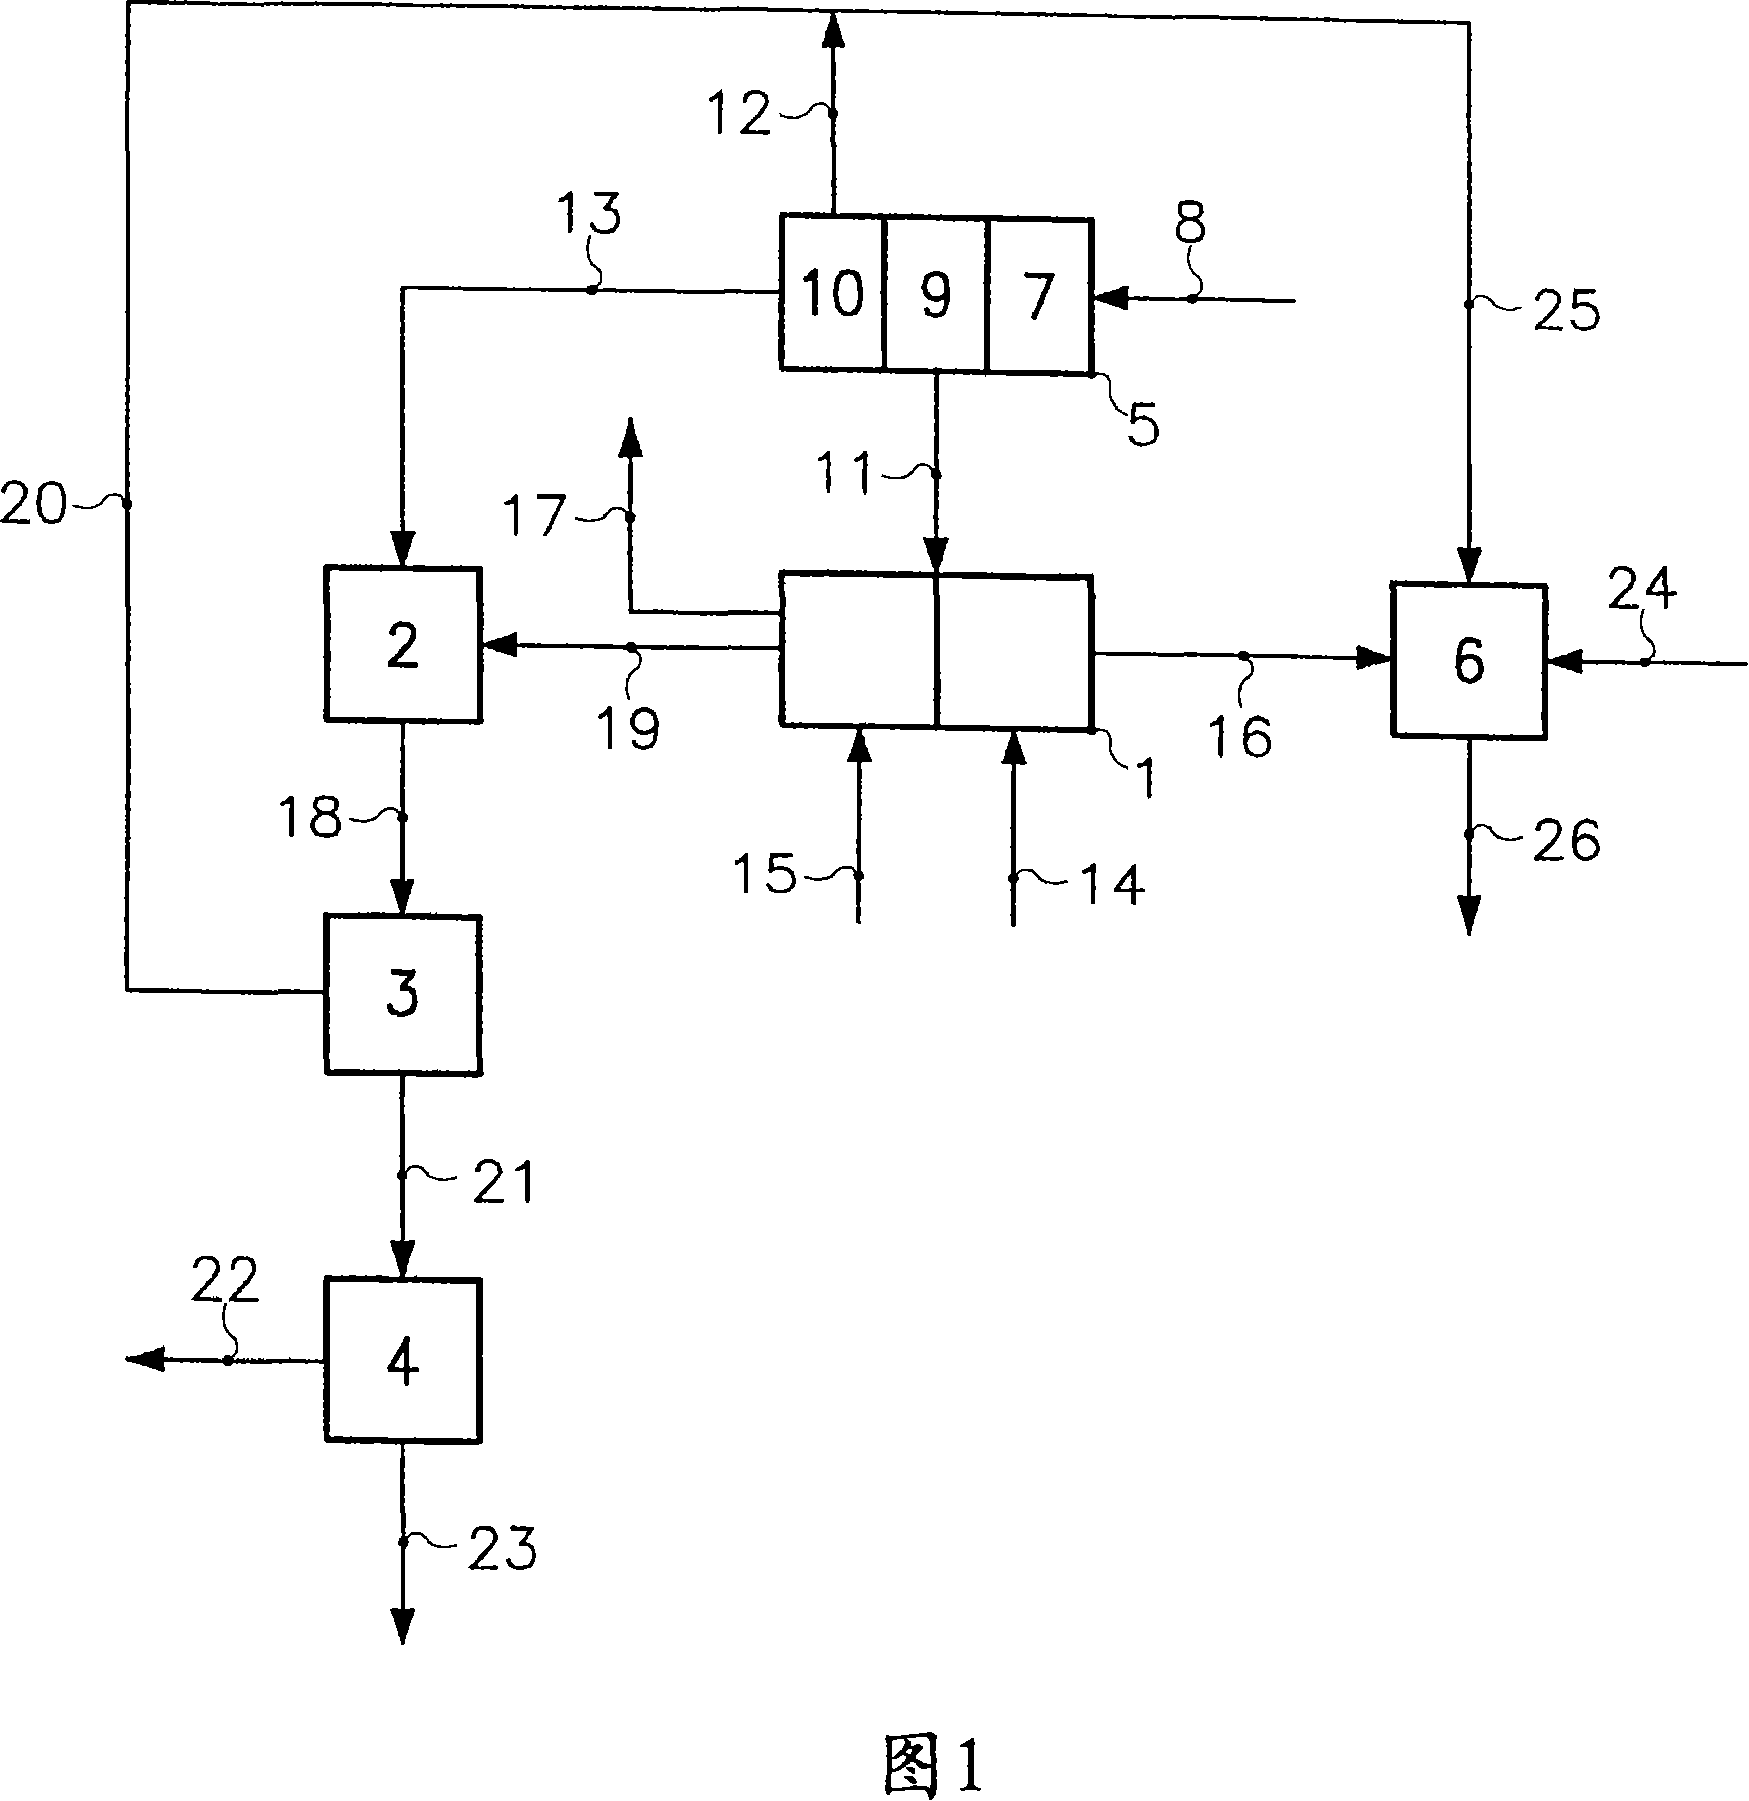 Process for jointly obtaining a chlorine derivative and crystals of sodium carbonate